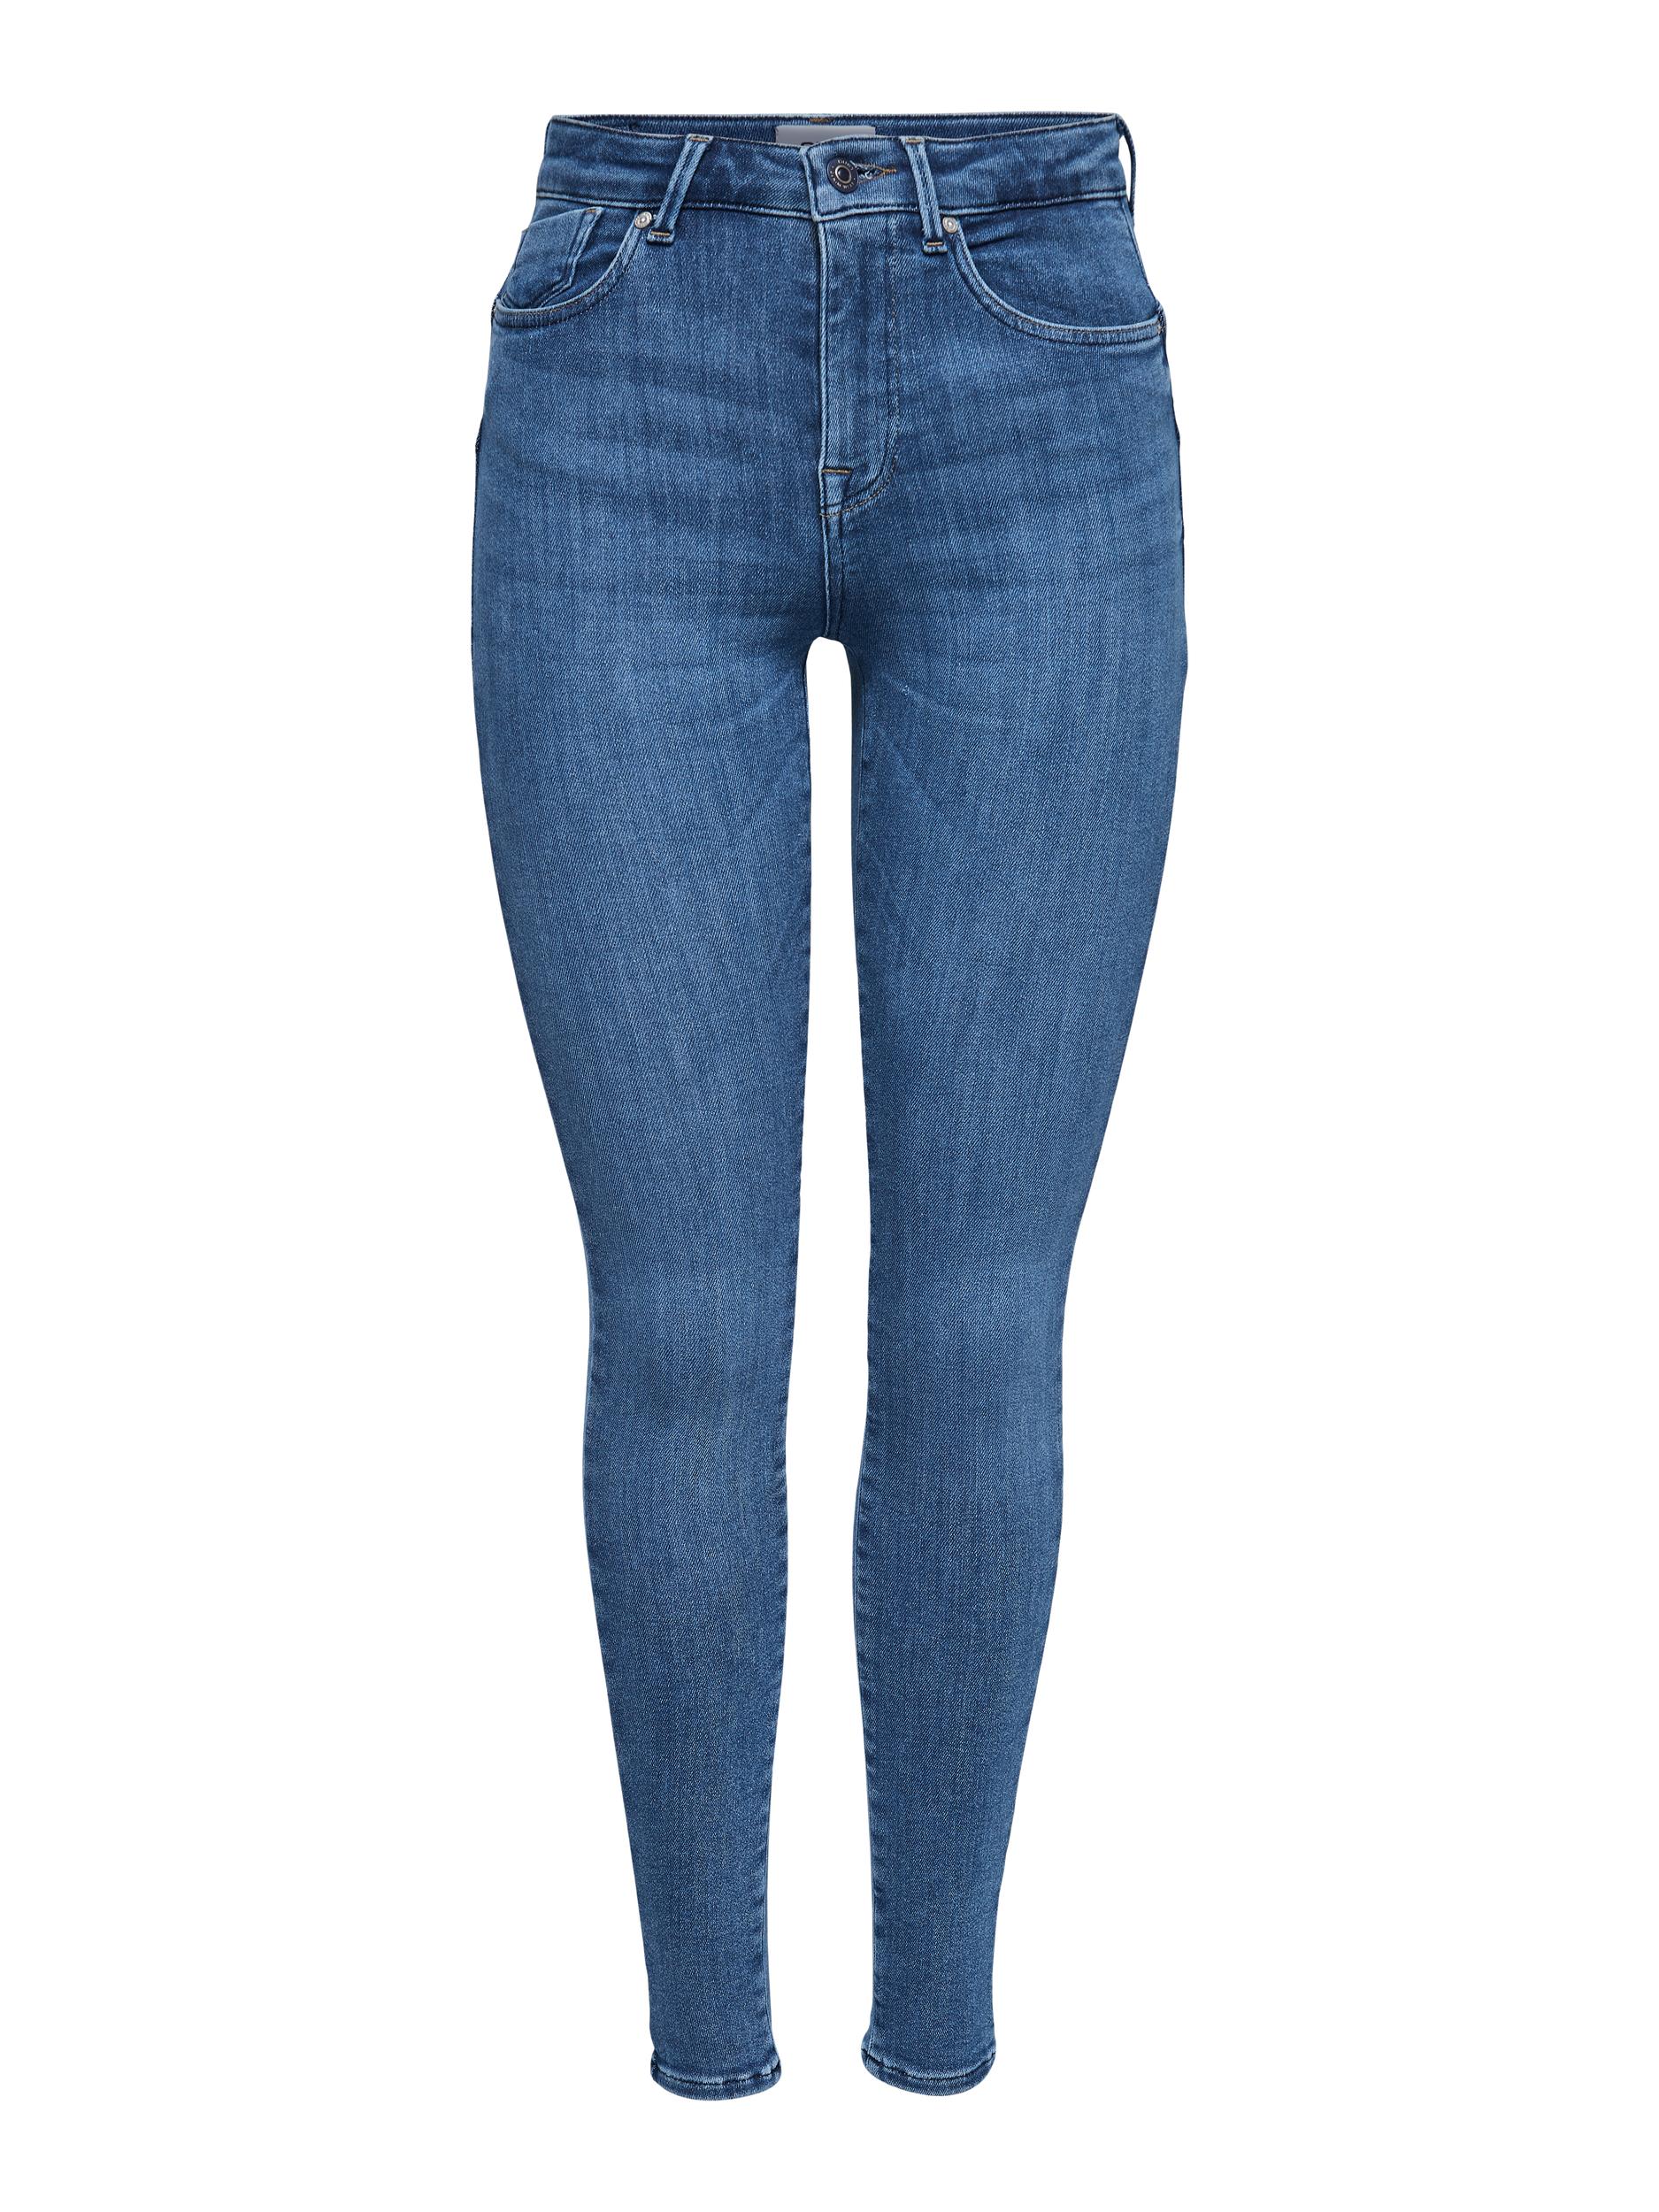 Abbigliamento Nlrs7 ONLY Jeans ONLPower Mid Push Up Skinny Fit in Blu 